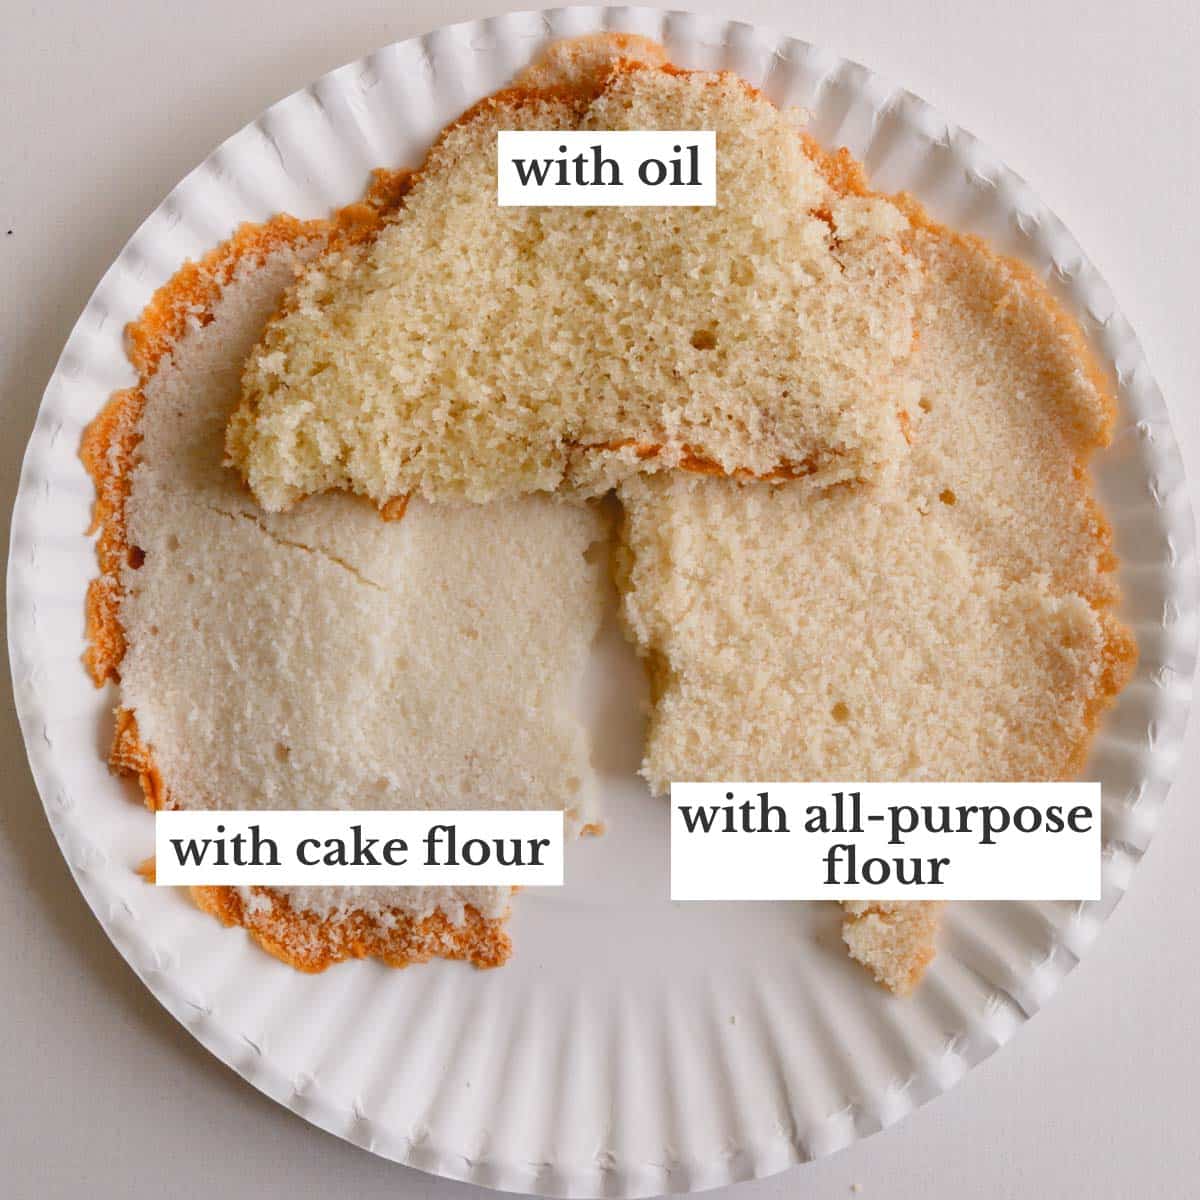 Cakes made with cake flour, oil, and all-purpose flour.